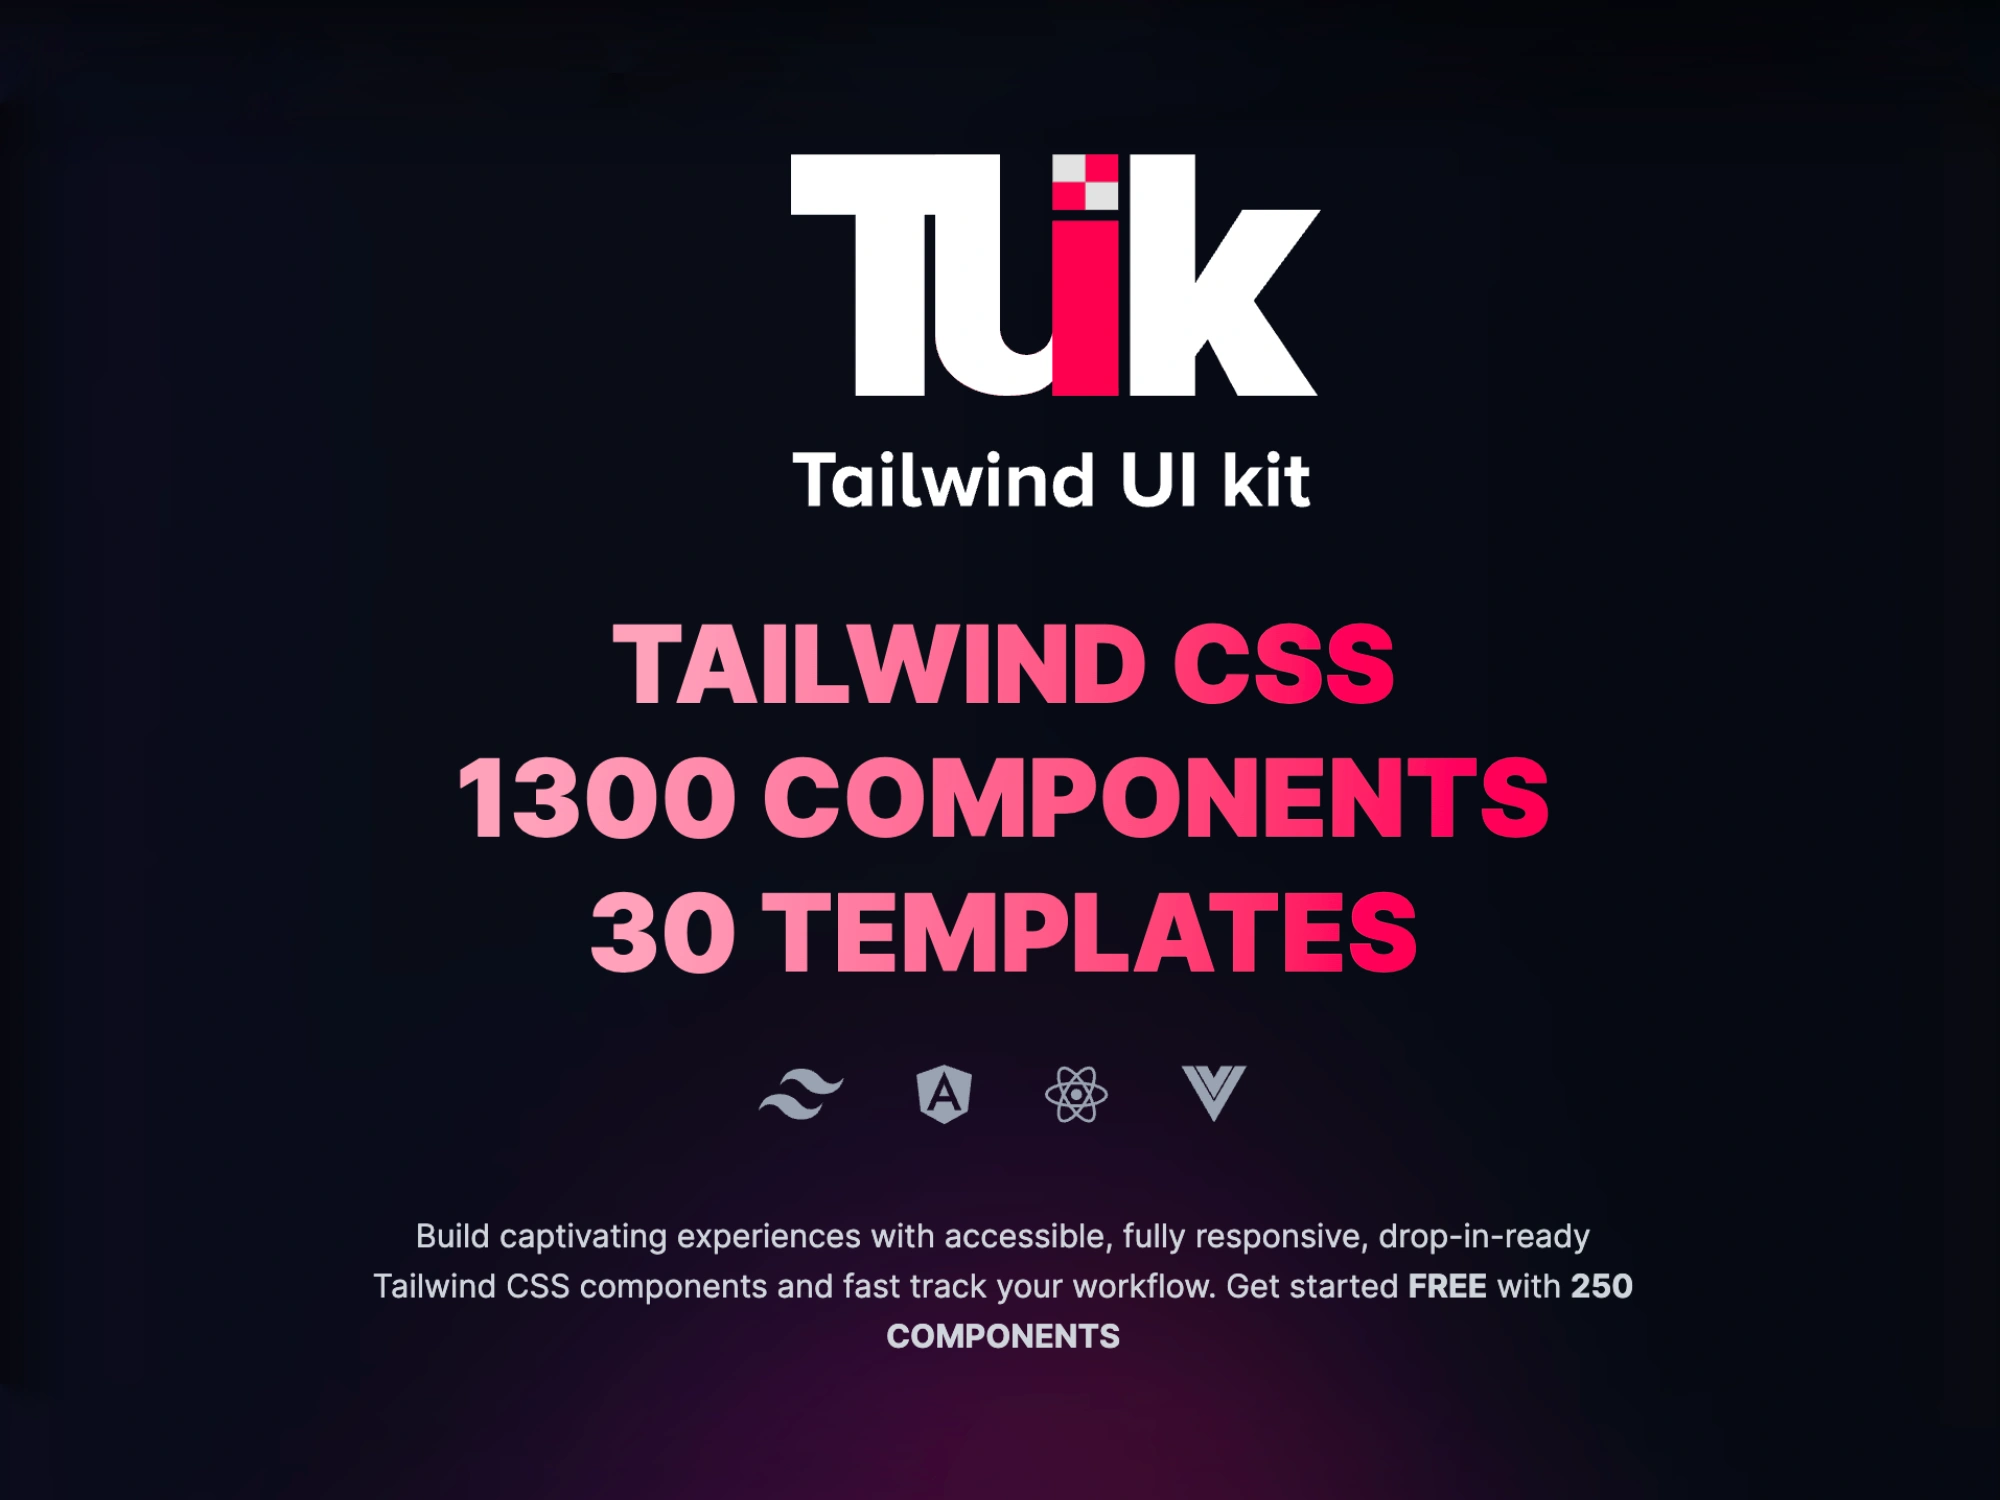 [VIP] Tailwind UI Kit: Tailwind CSS components and templates